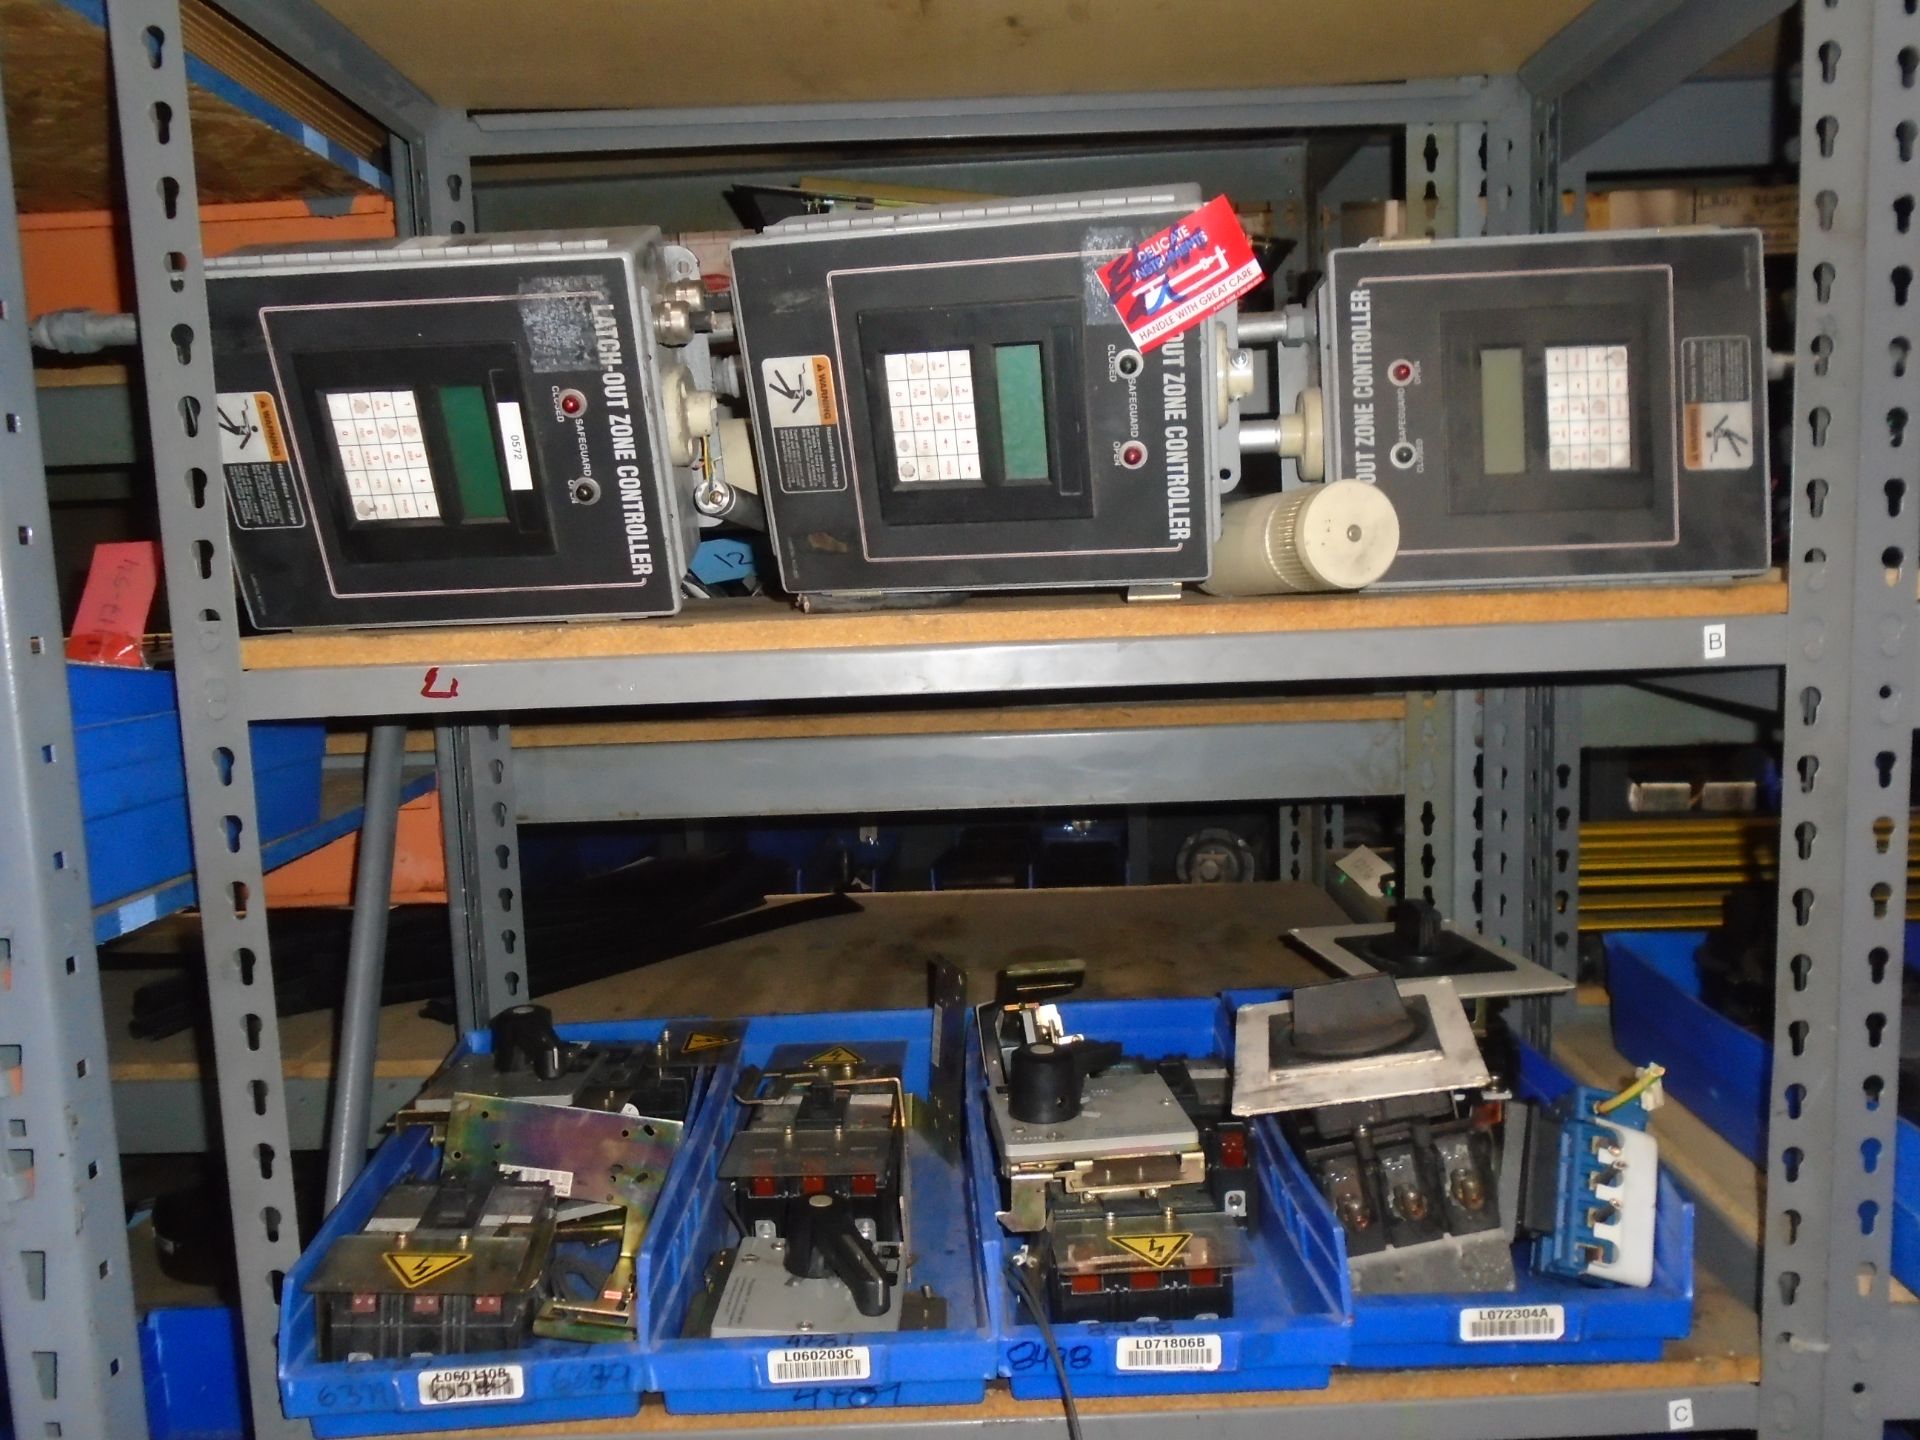 Electrical Components, Staters, Timers, Switches, Disconnecting Boxes For CNC Lathe & Mills - Image 5 of 12